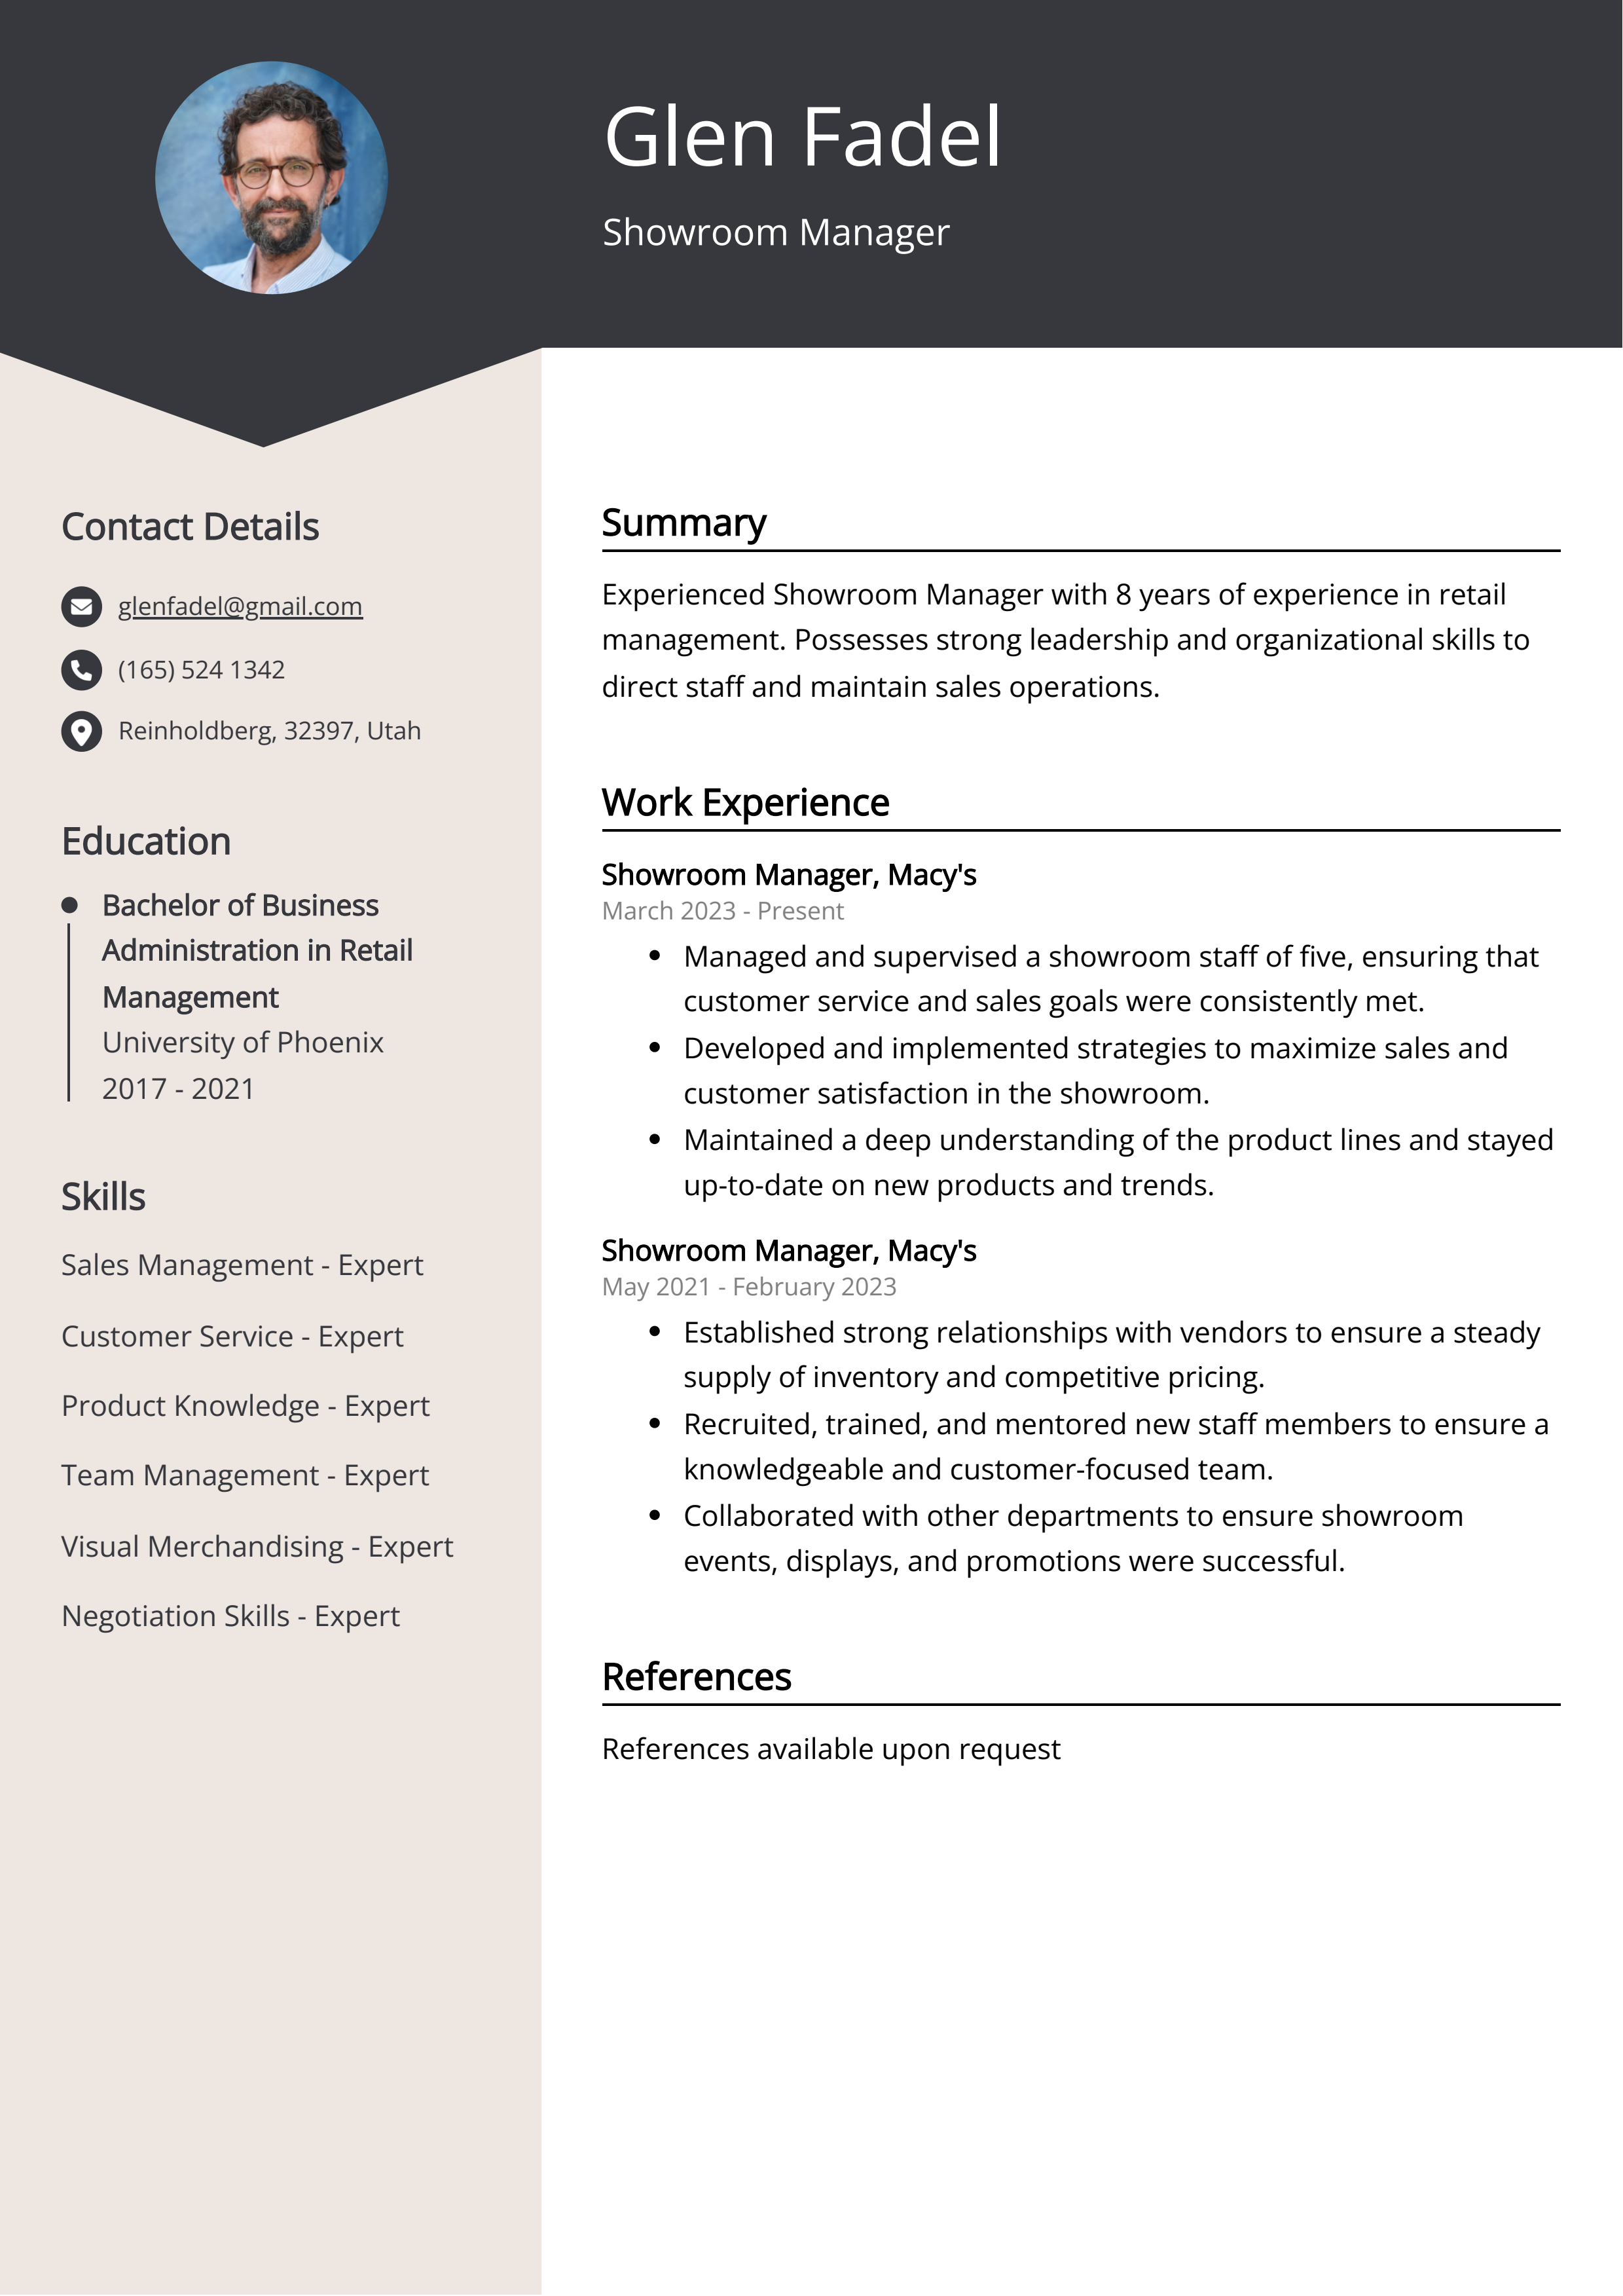 Showroom Manager CV Example